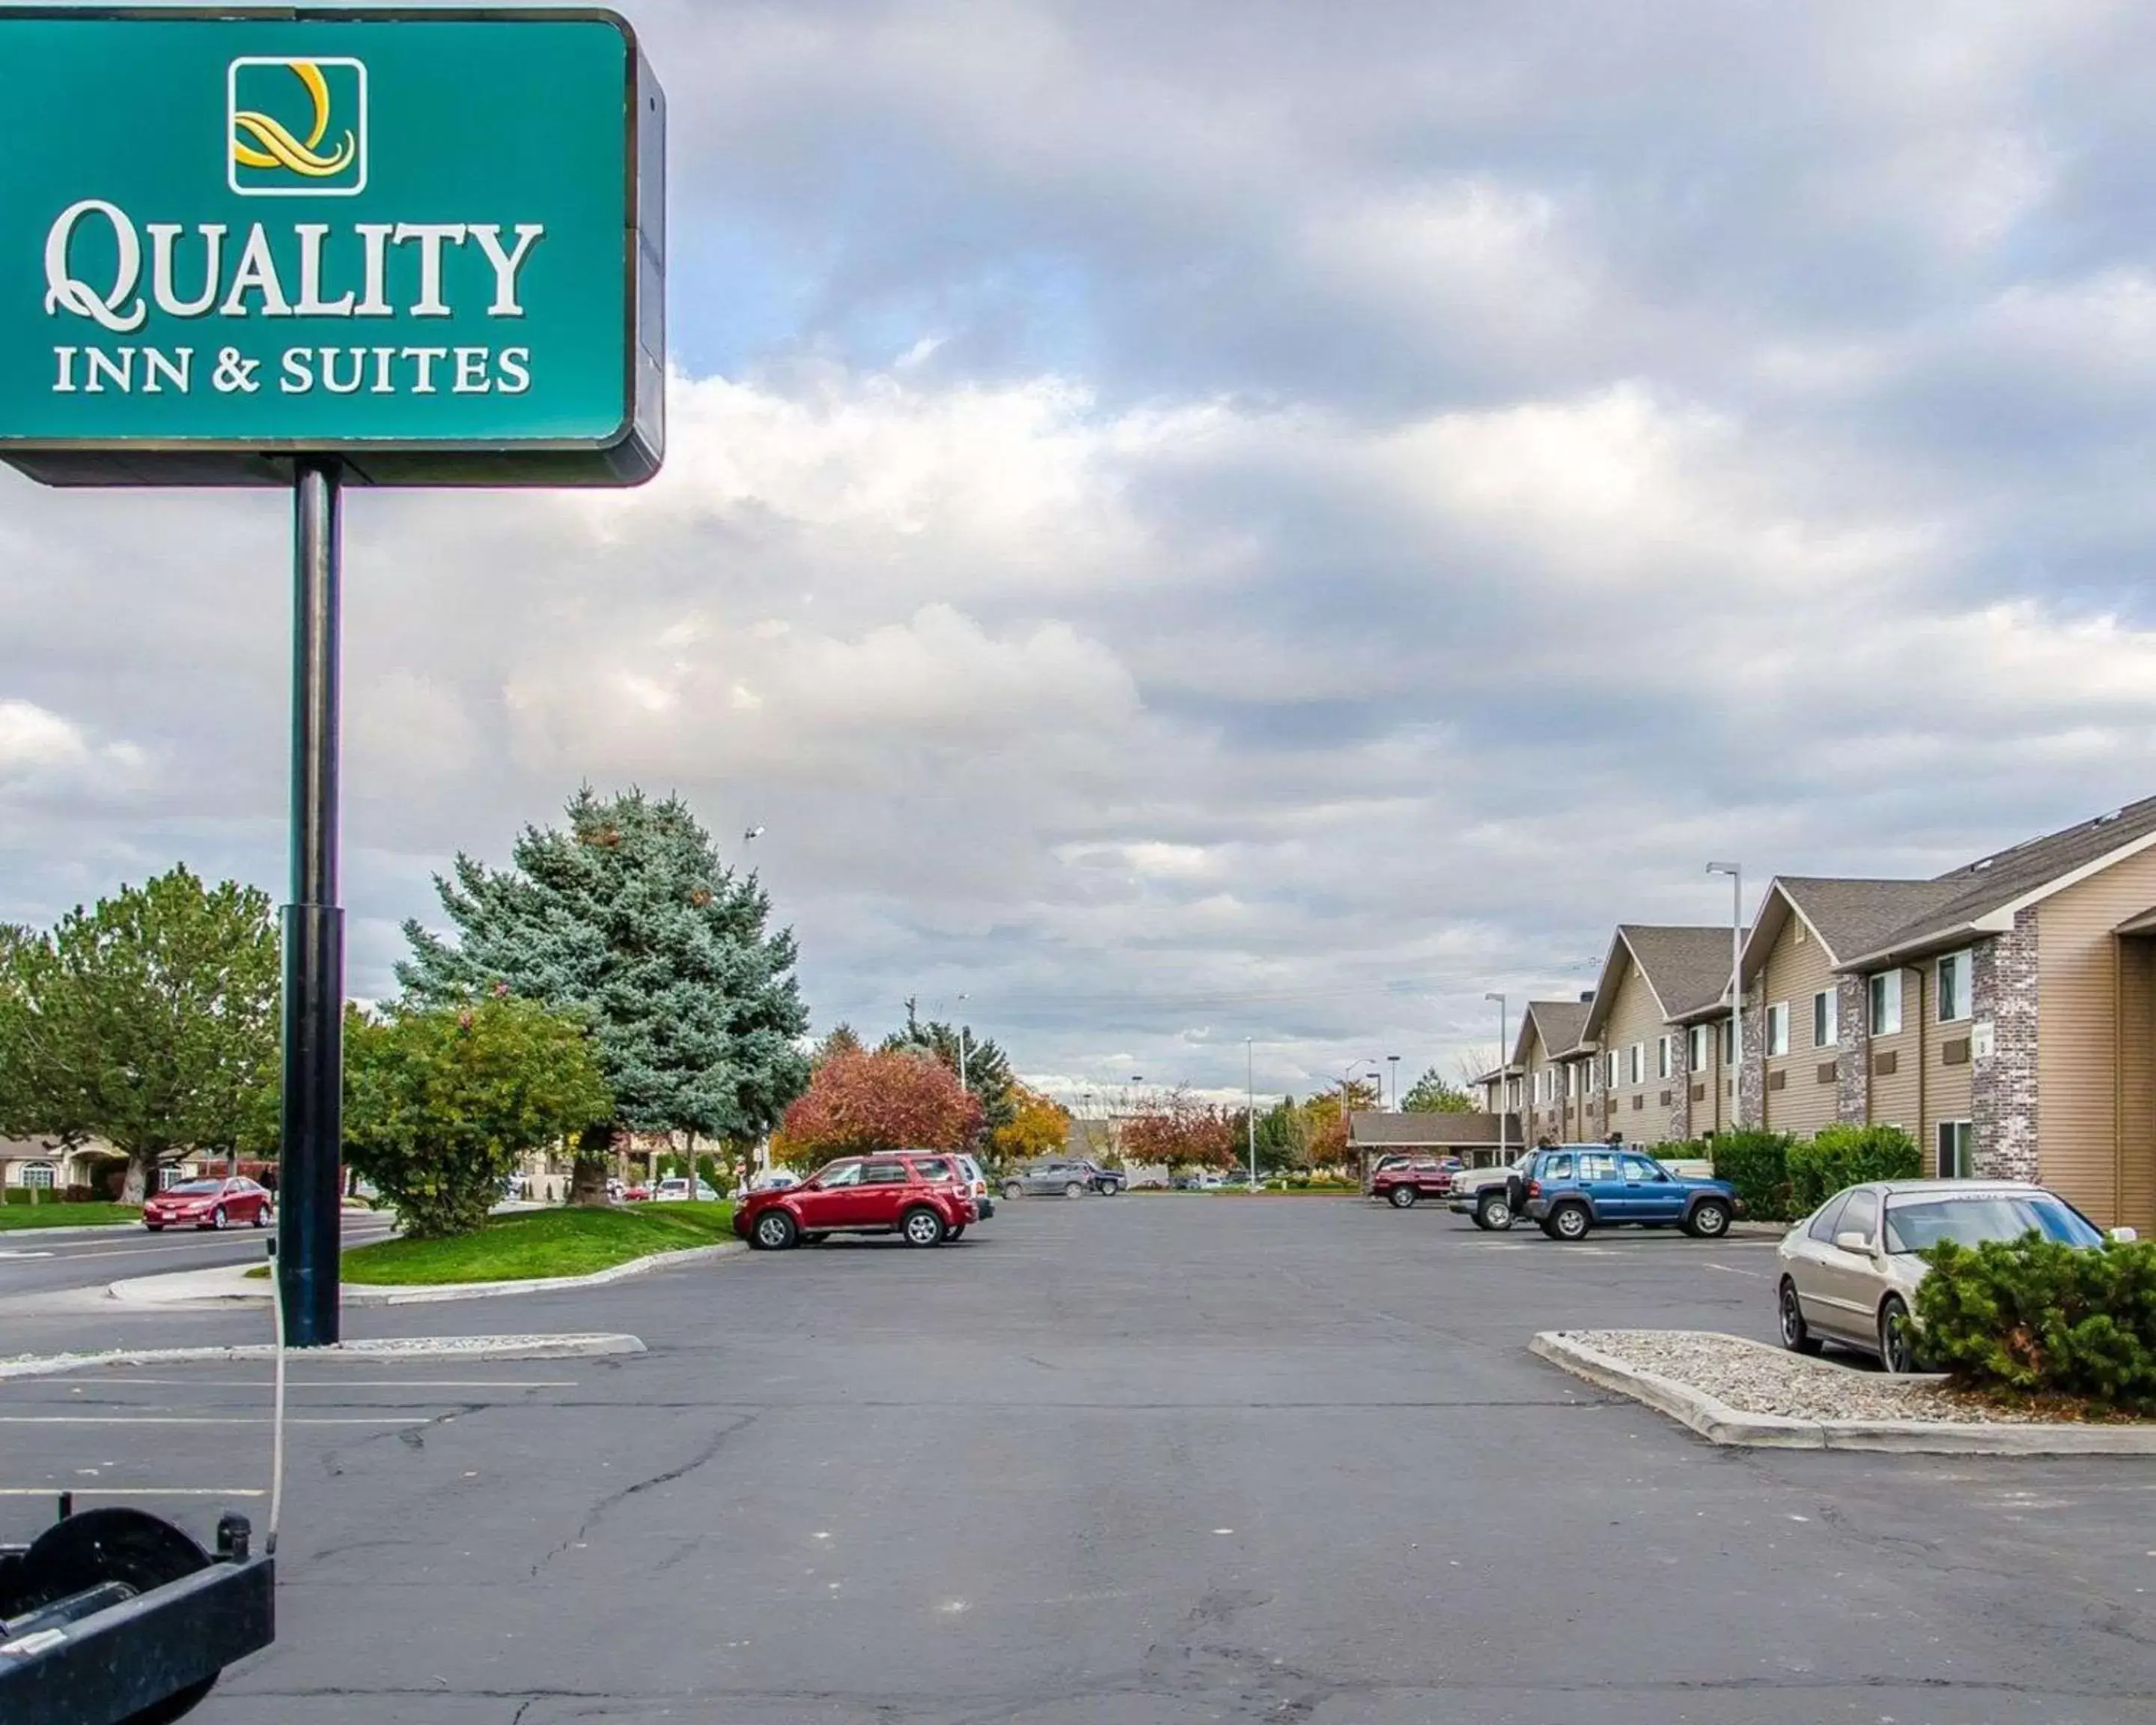 Property building in Quality Inn & Suites Twin Falls